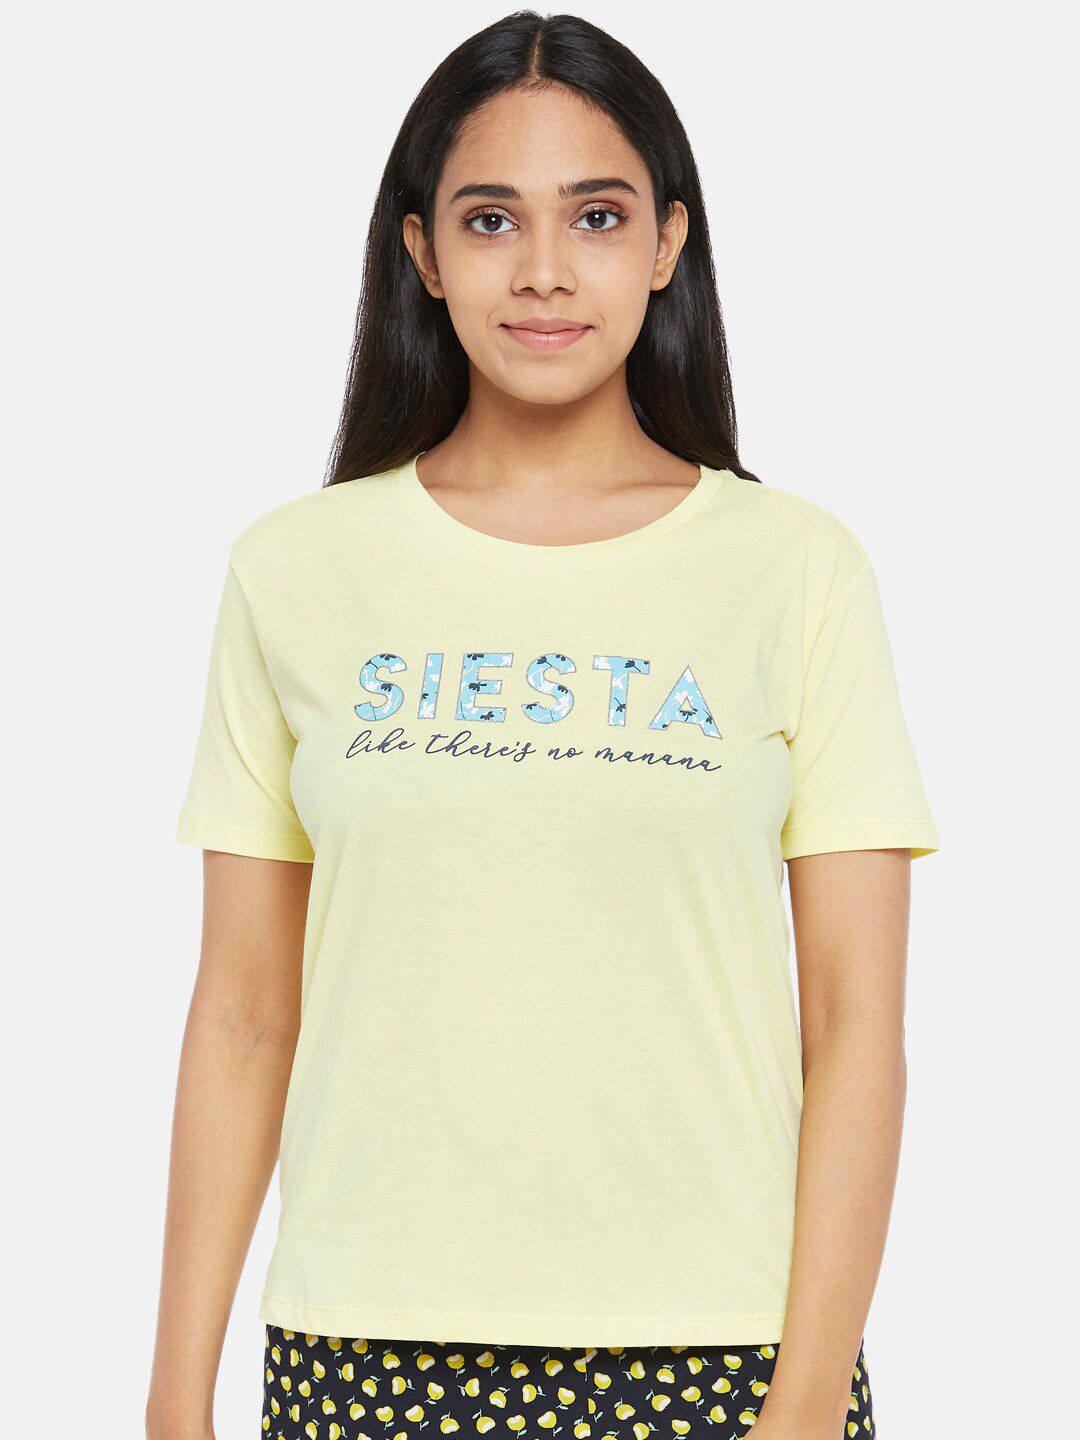 Dreamz by Pantaloons Women Yellow Typography Printed Pure Cotton T-shirt Price in India